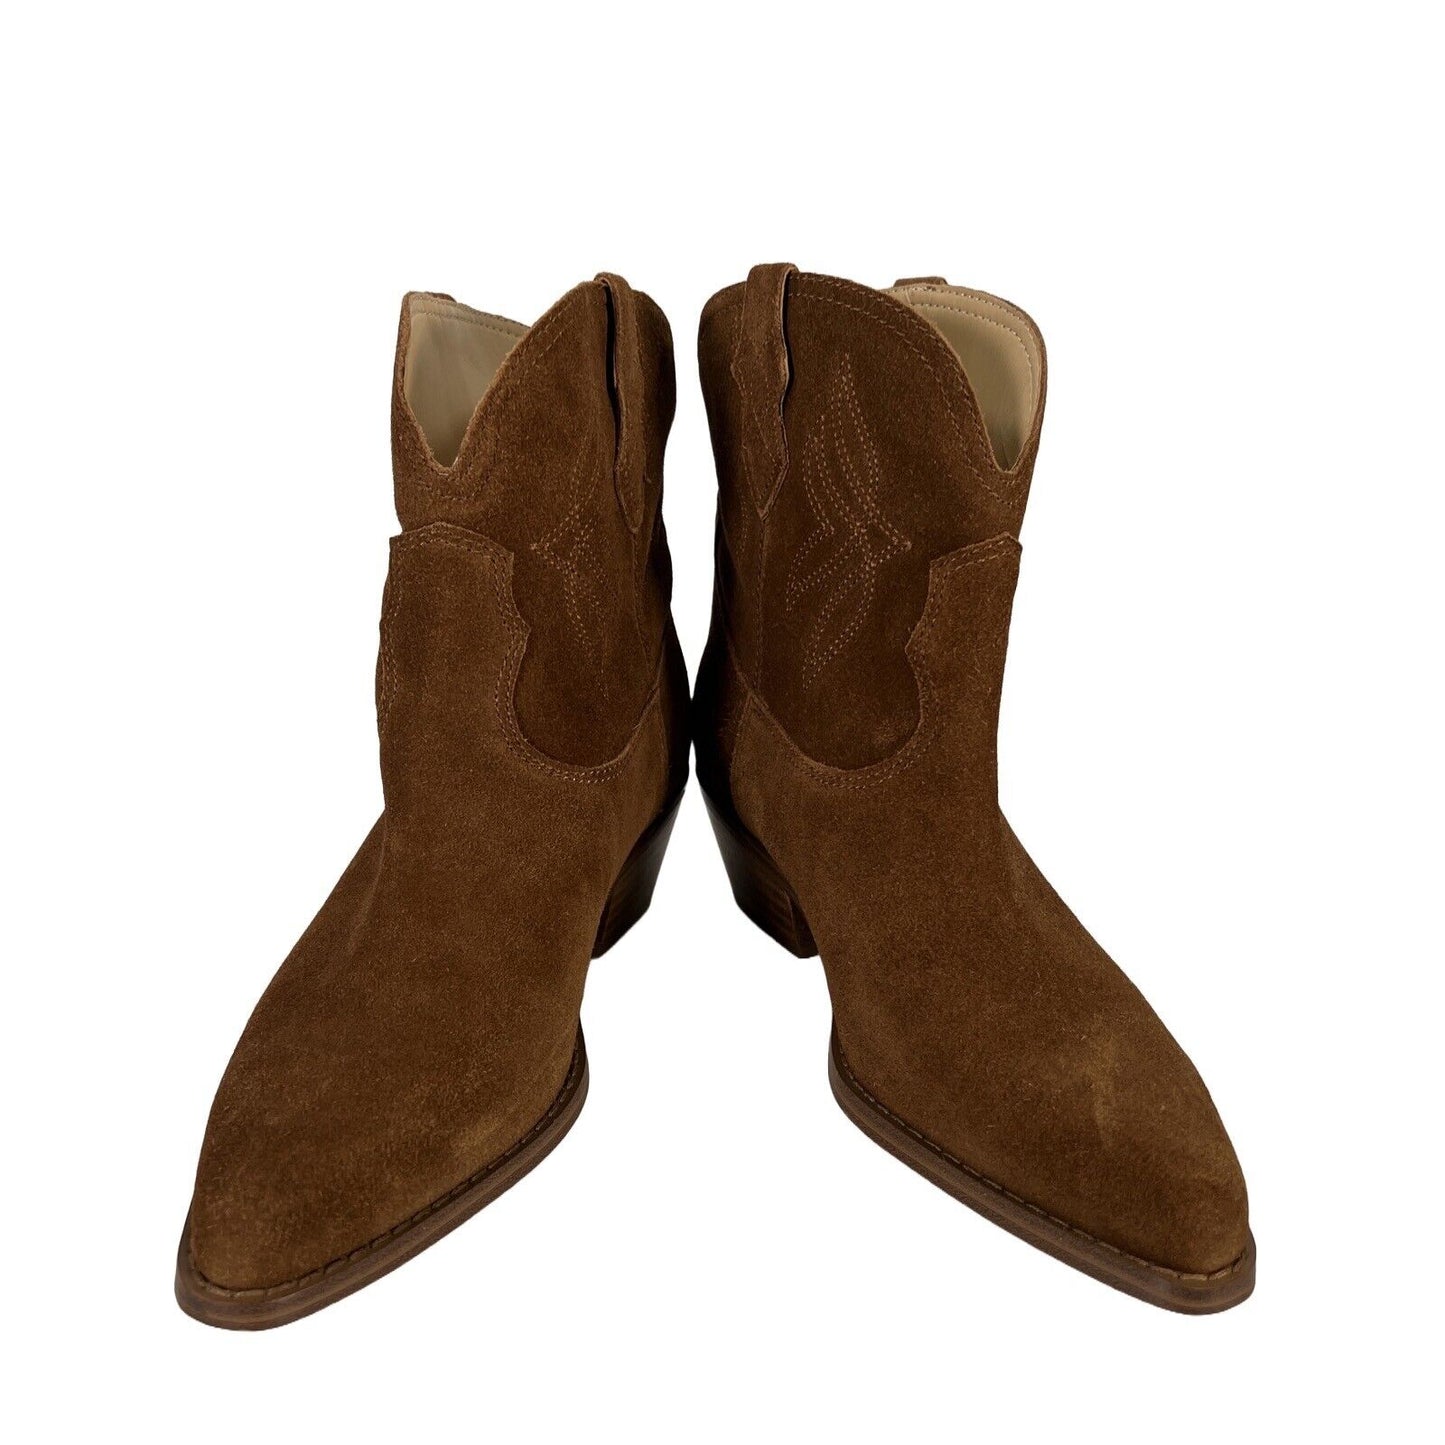 Nine West Women's Brown Suede Texen Pull On Ankle Western Boots - 8M